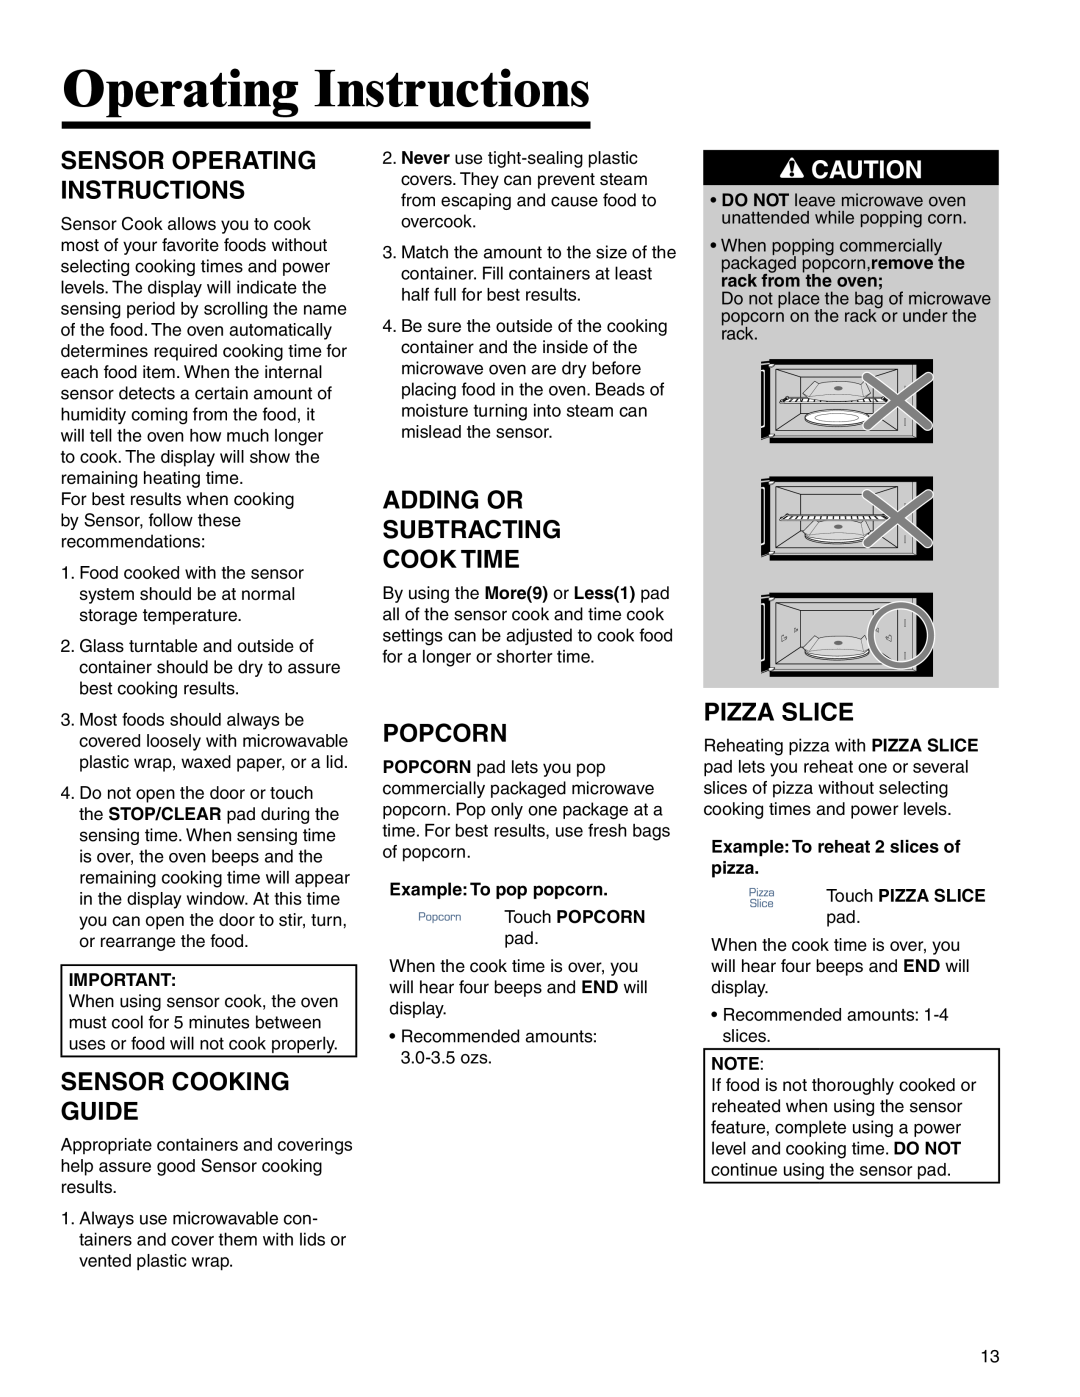 Amana AMV5164BA/BC Sensor Operating Instructions, Sensor Cooking Guide, Adding Or Subtracting Cook Time, Popcorn 